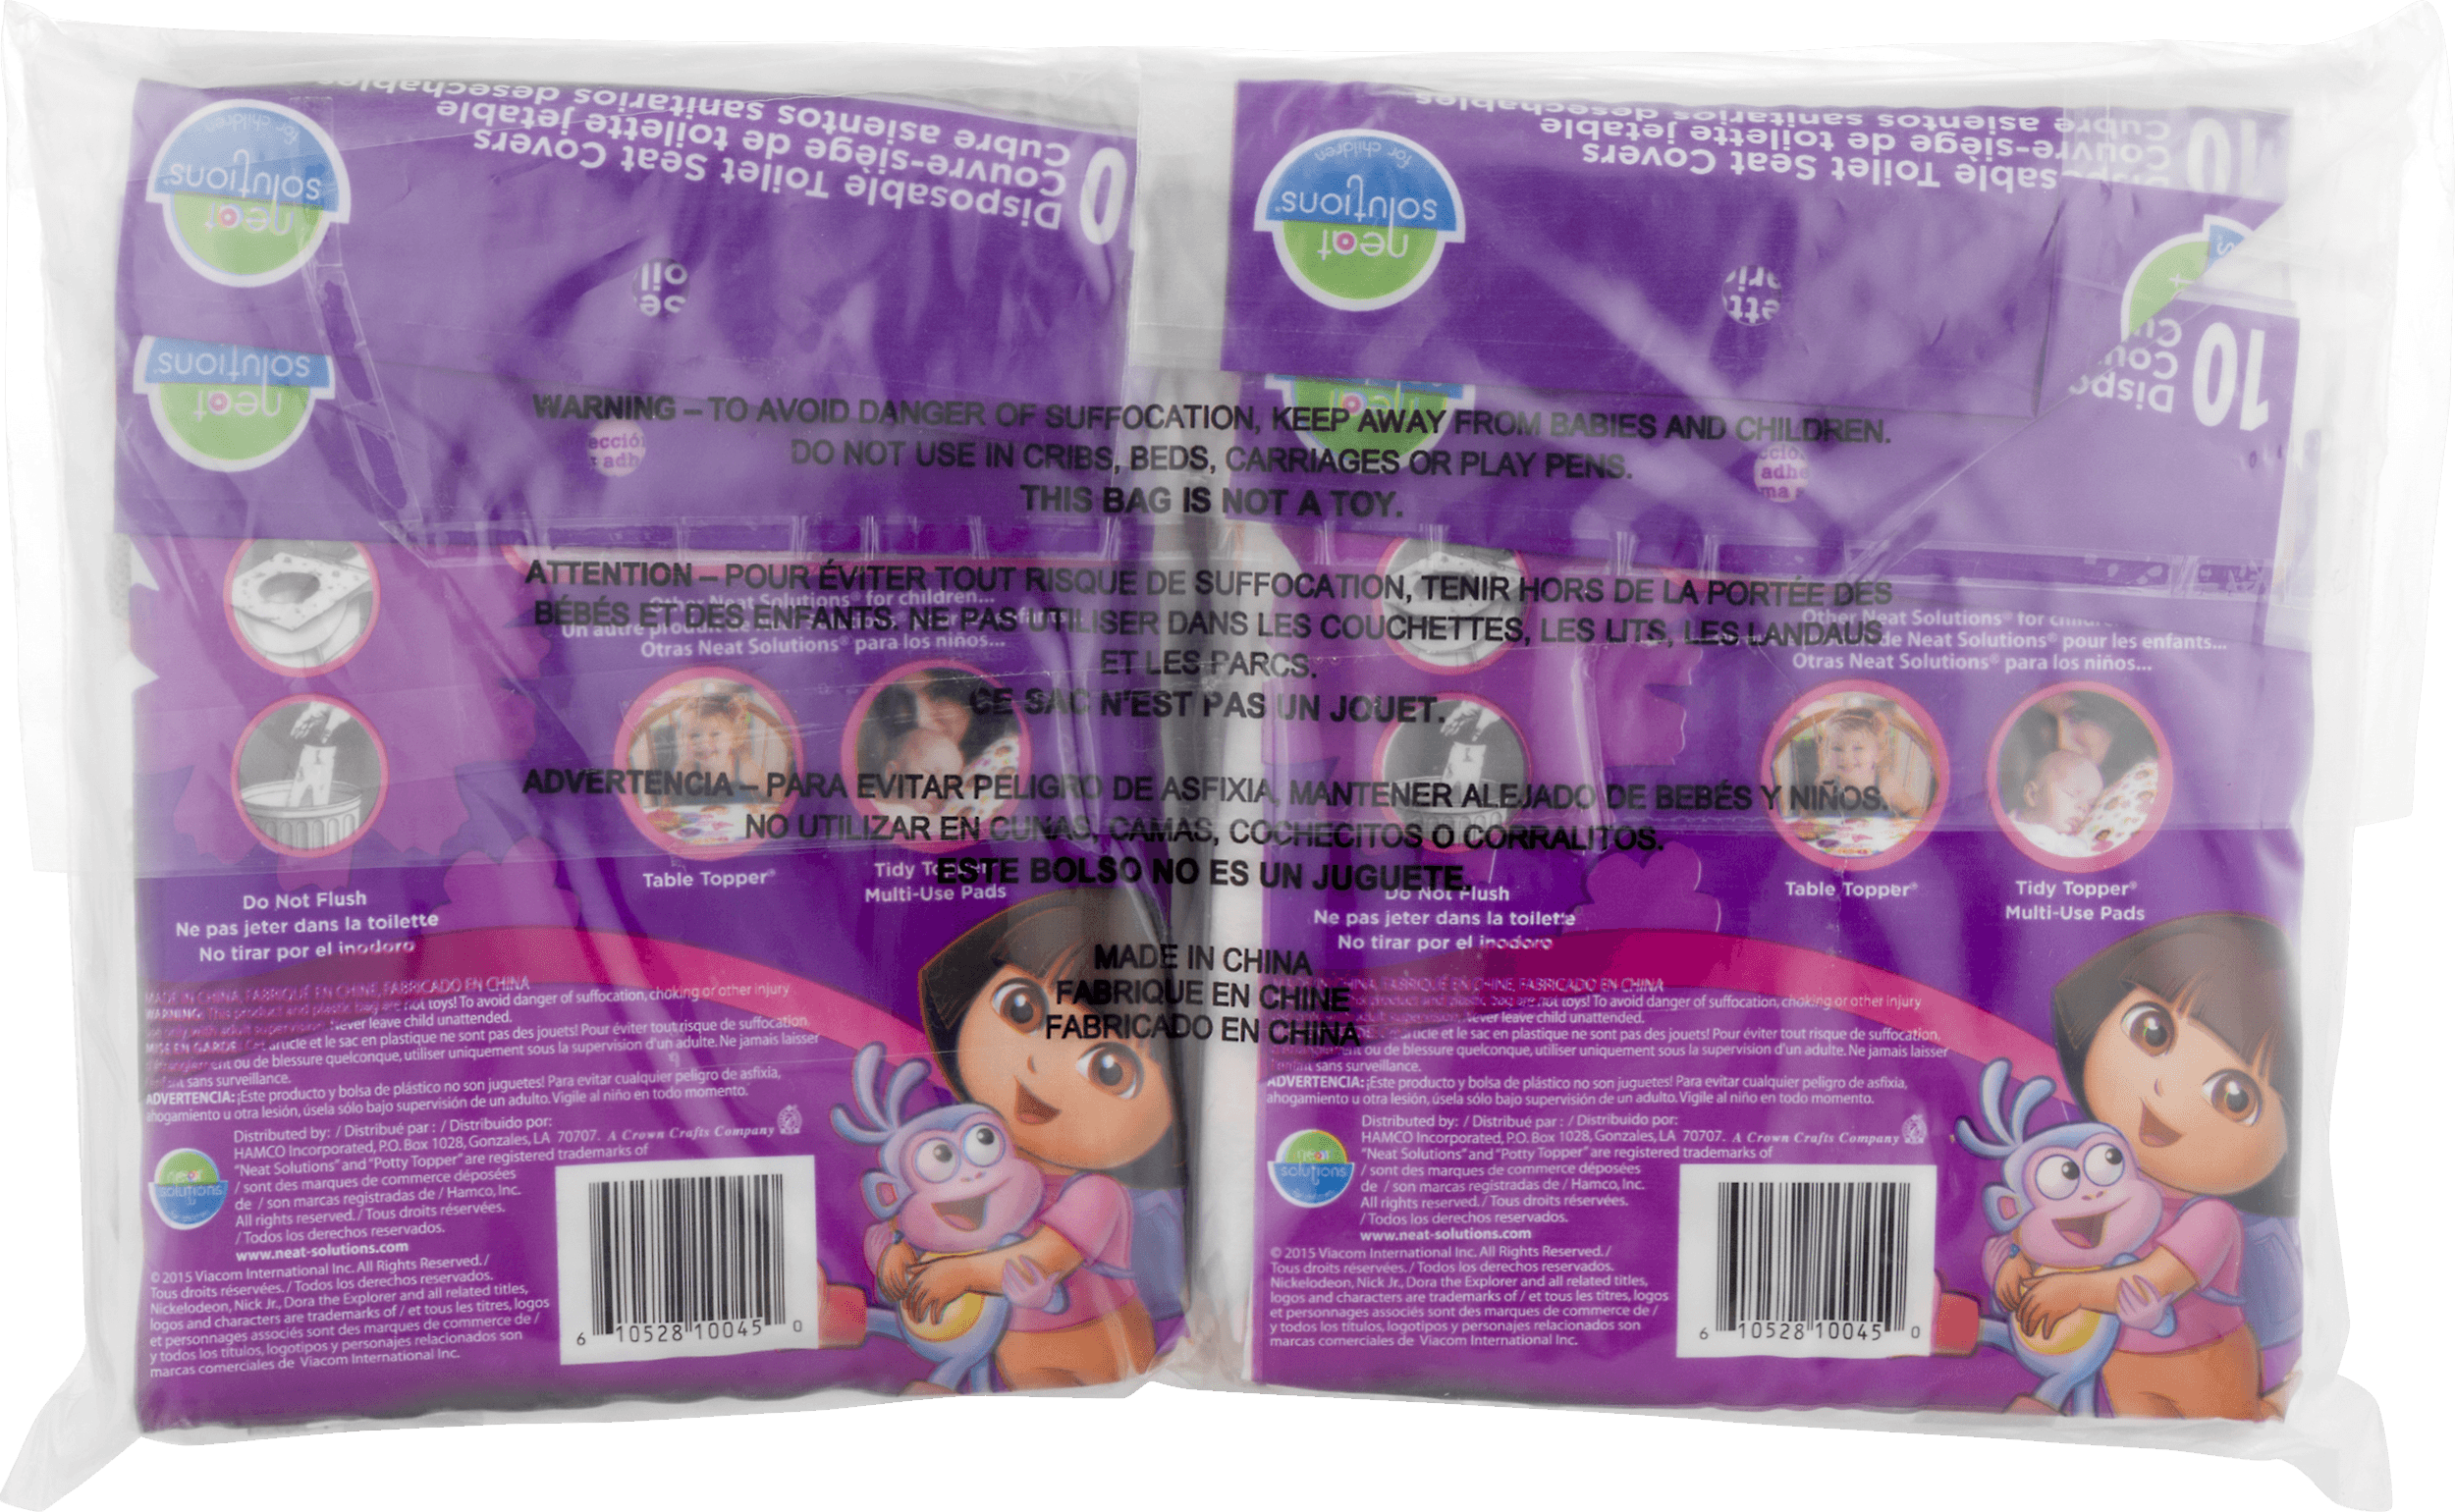 Dora the Explorer Disposable Toilet Seat Covers, 40 Count - image 5 of 6